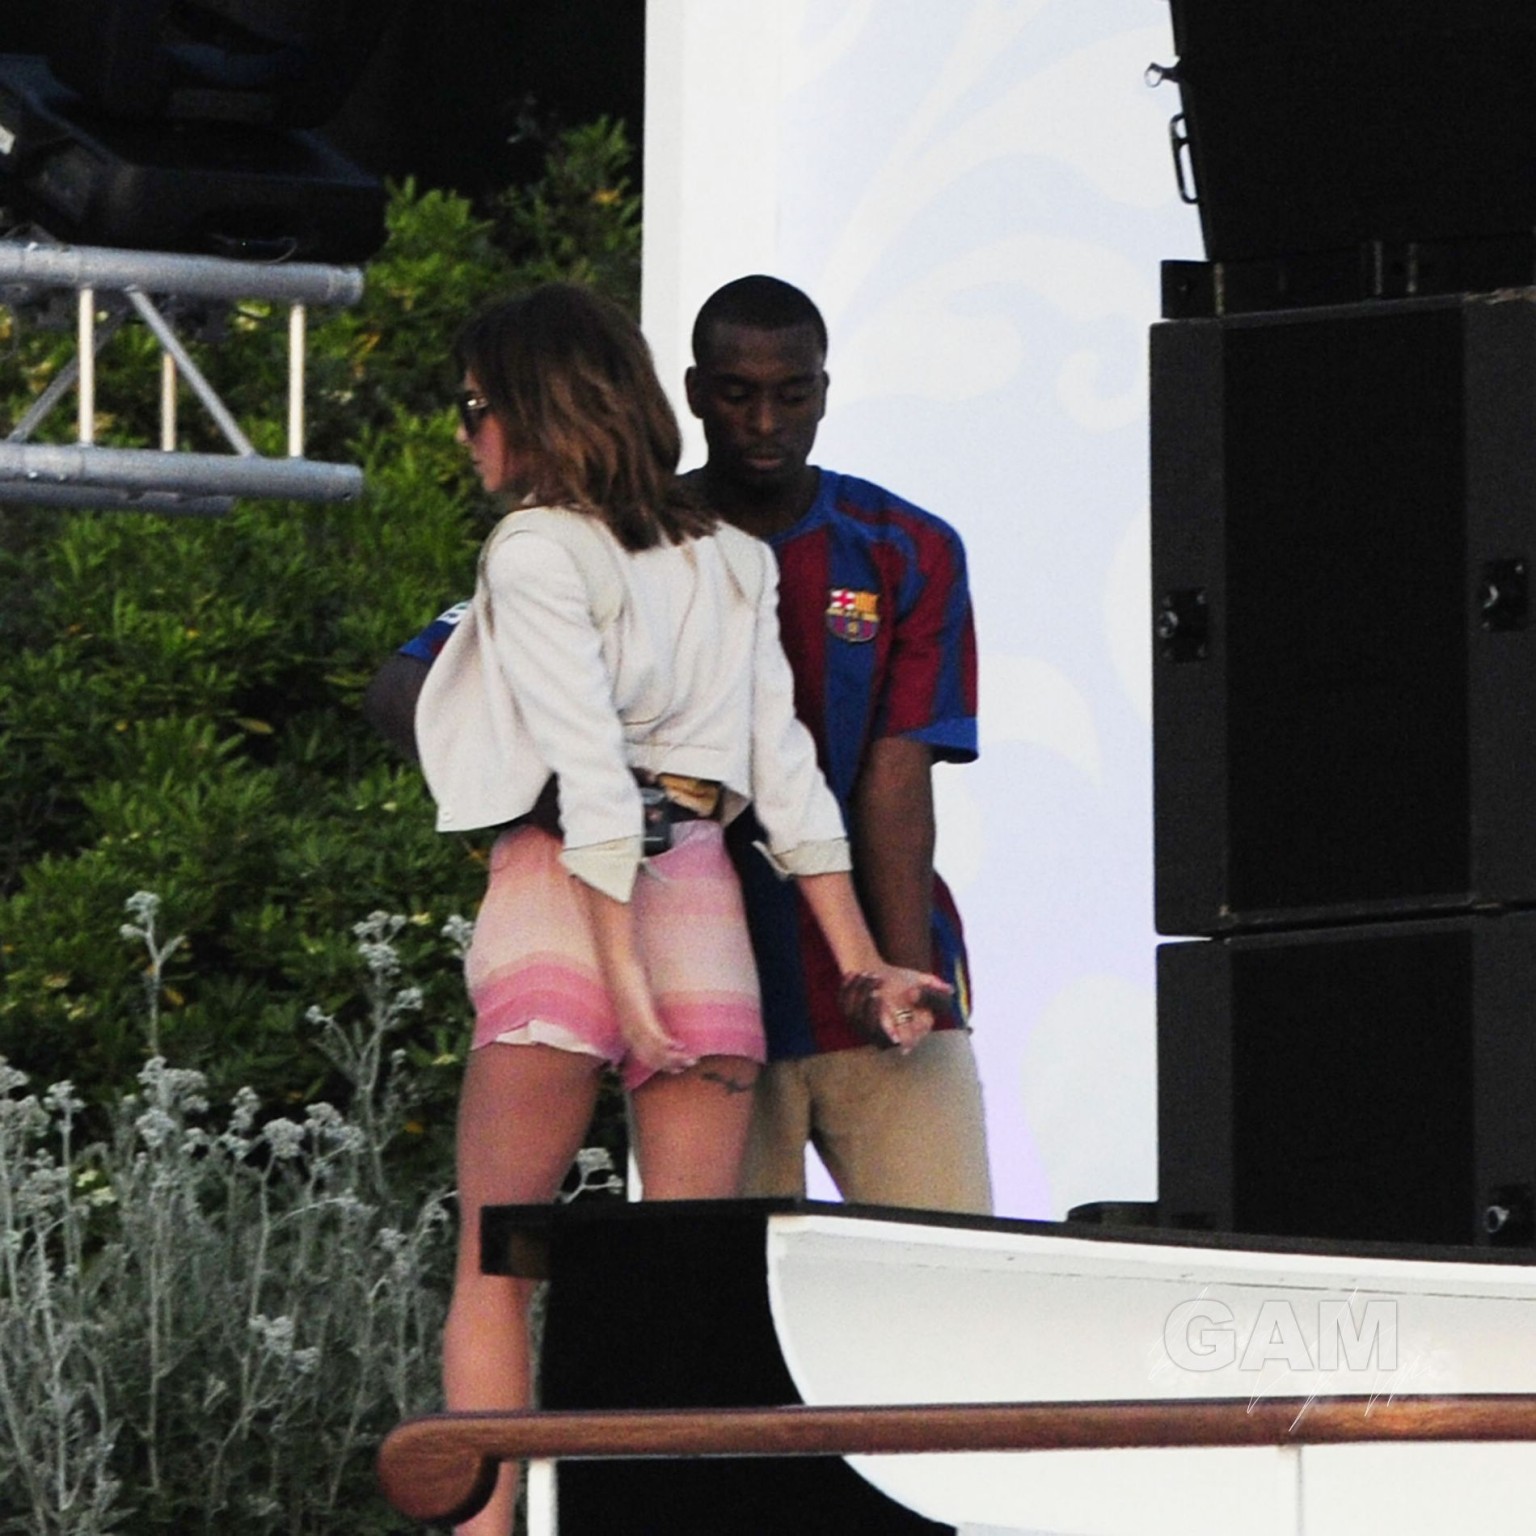 Cheryl Tweedy showing off her ass in shorts at the soundcheck at Hotel De Cap in #75326221